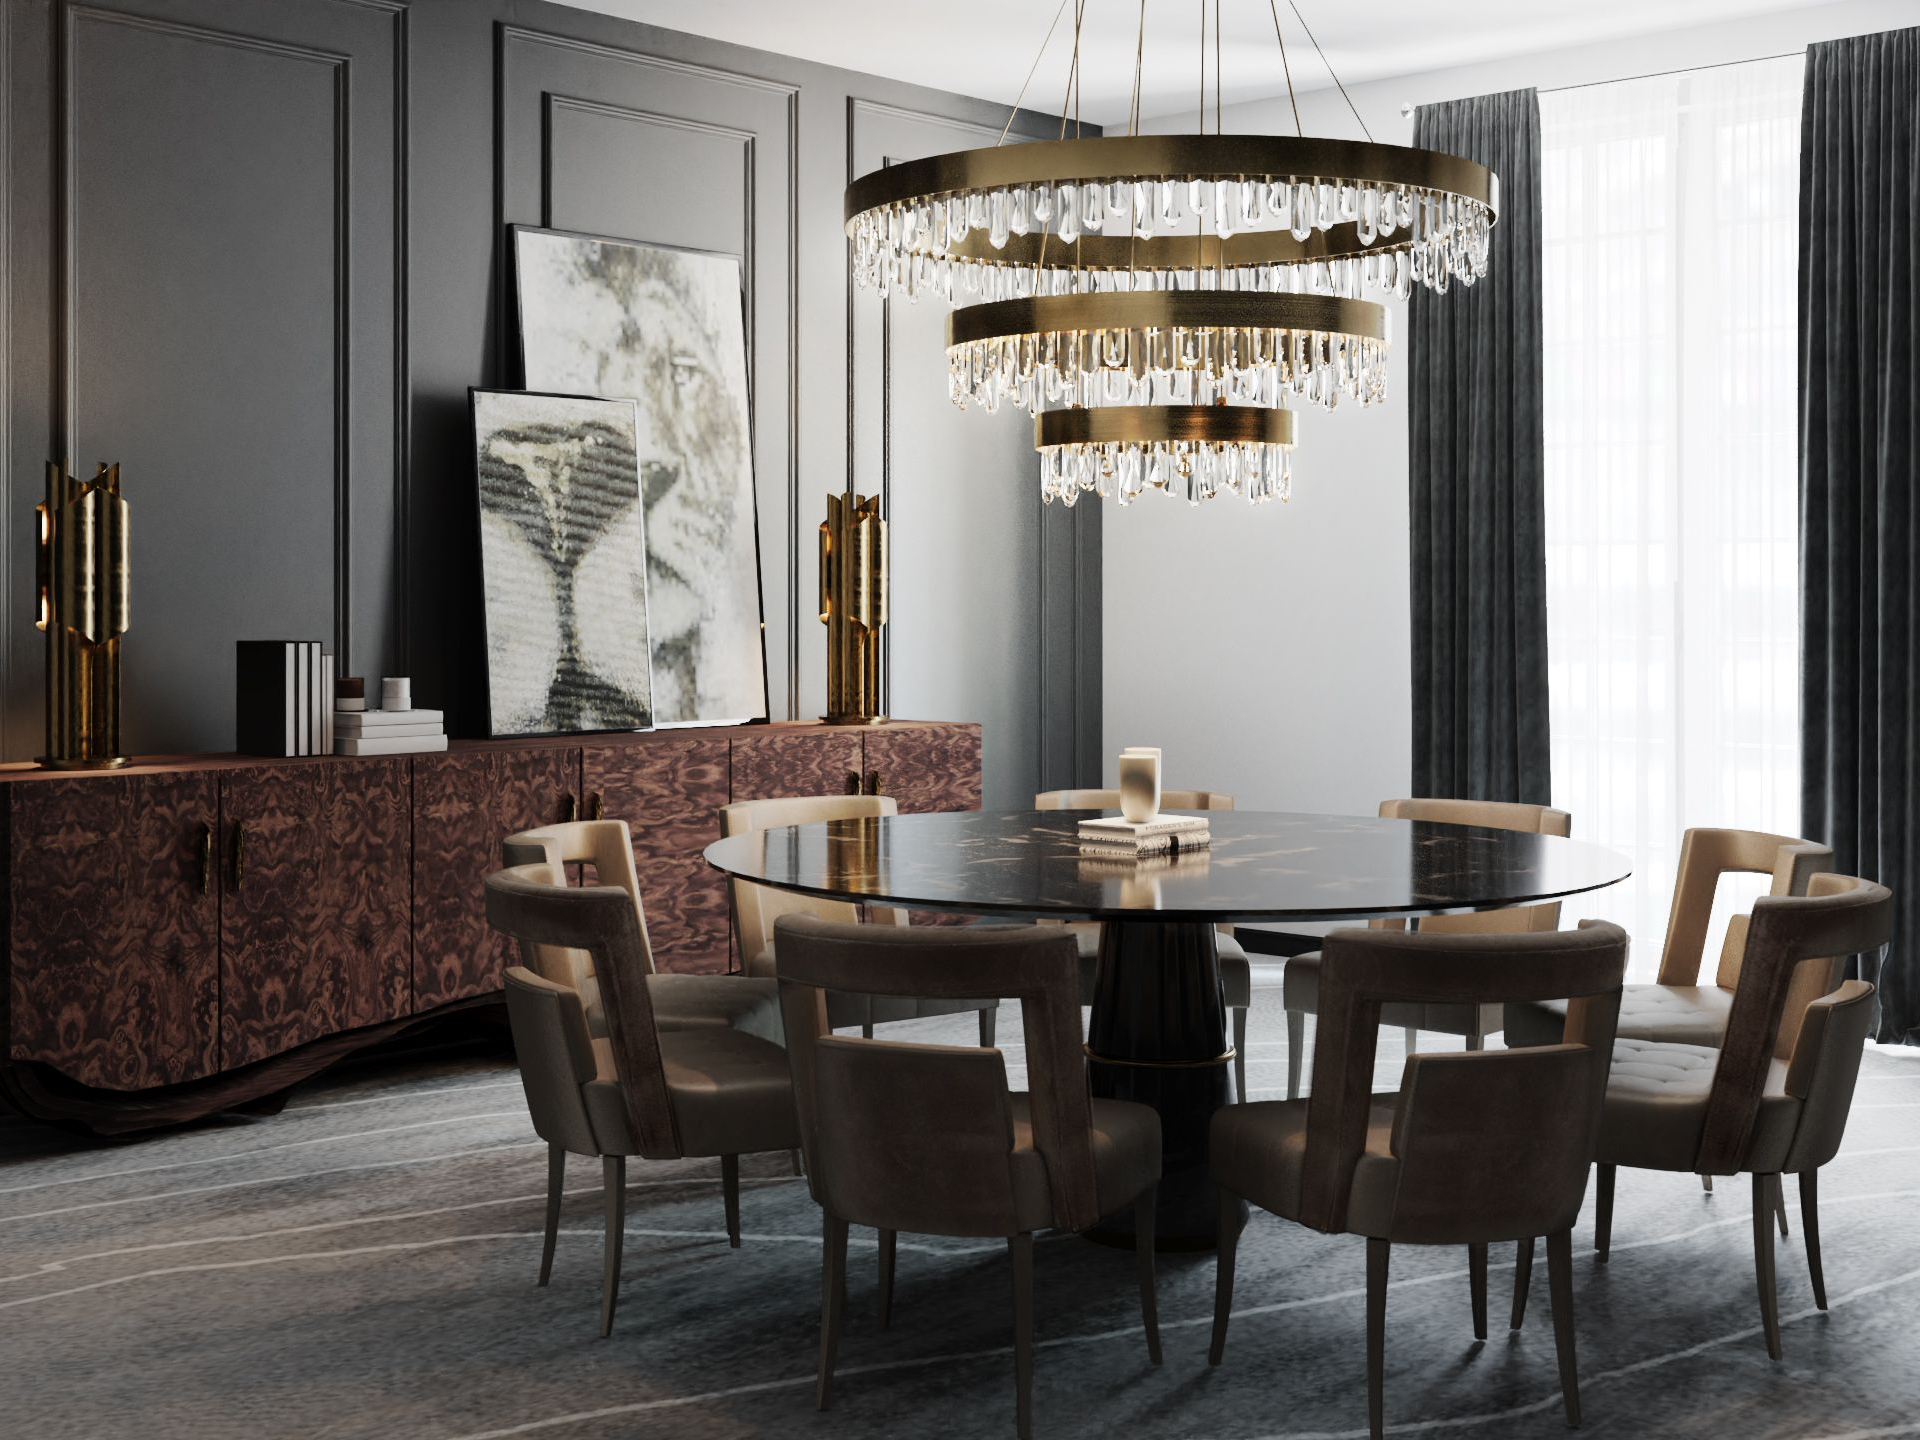 Elegant Dining Room With An Aged Brushed Chandelier - Home'Society